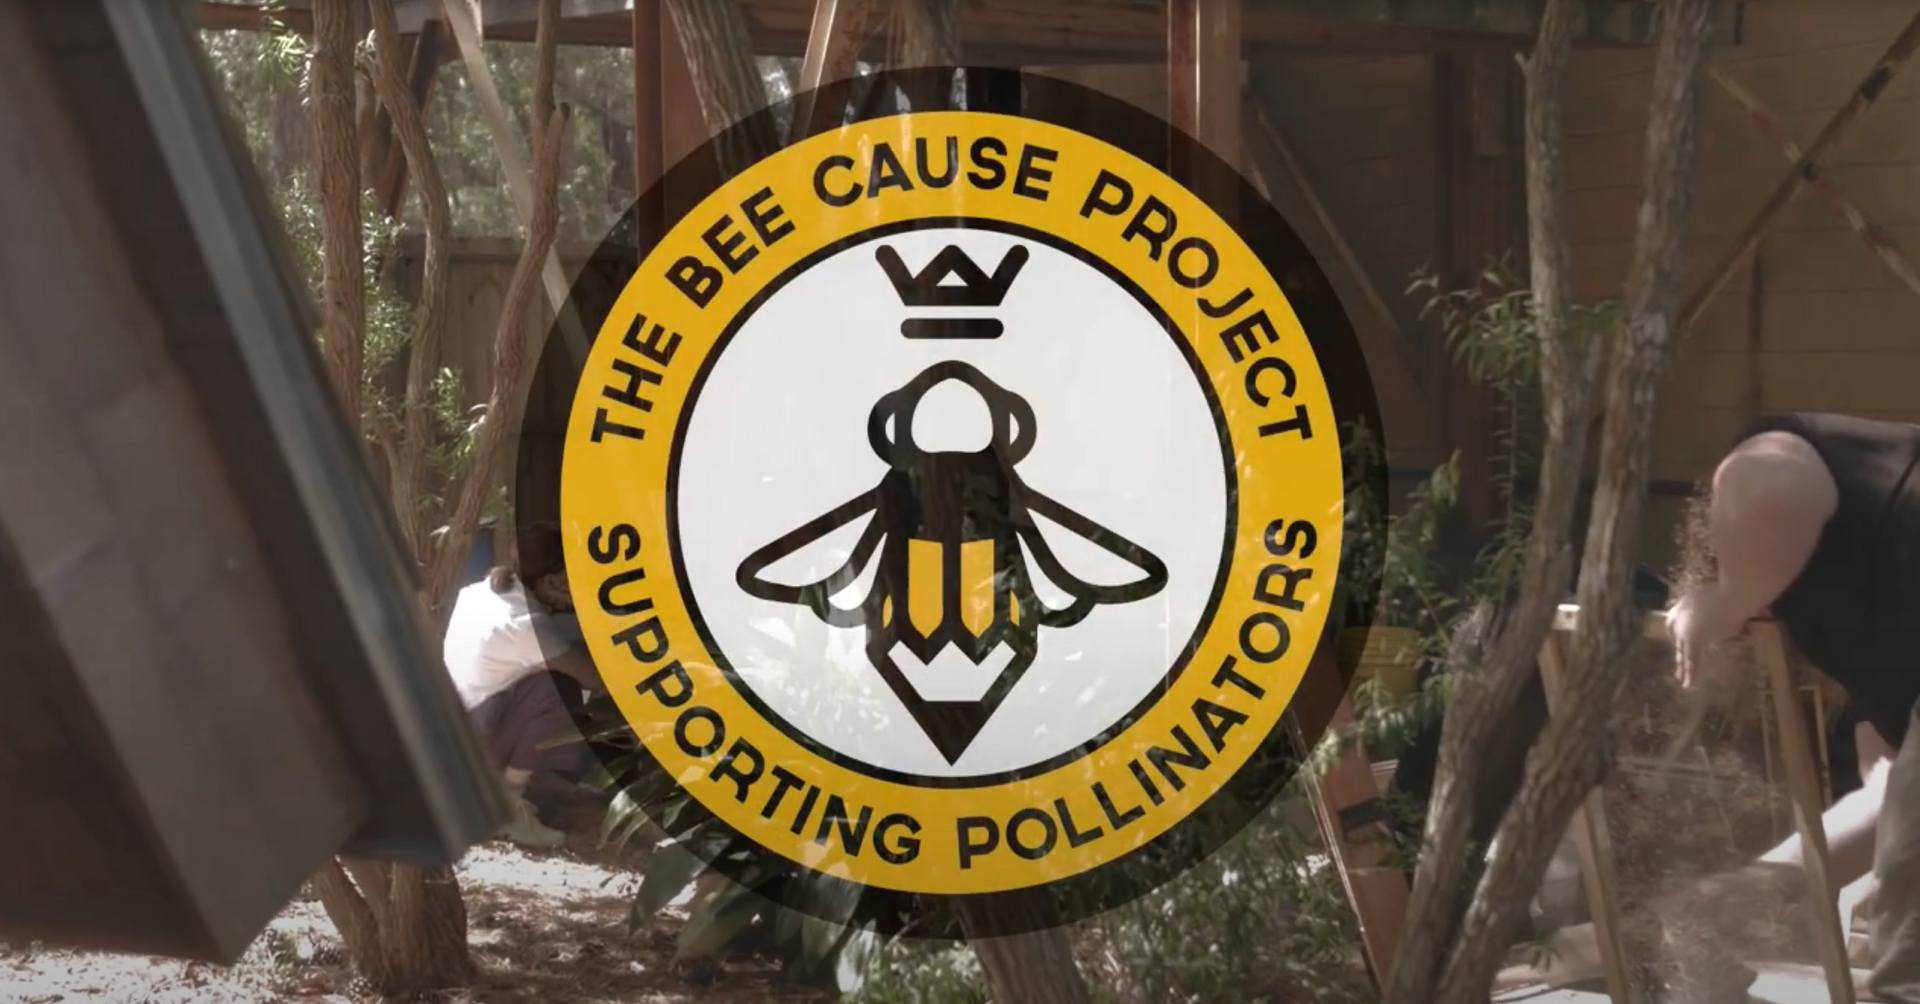 Load video: Bee Cause Honey